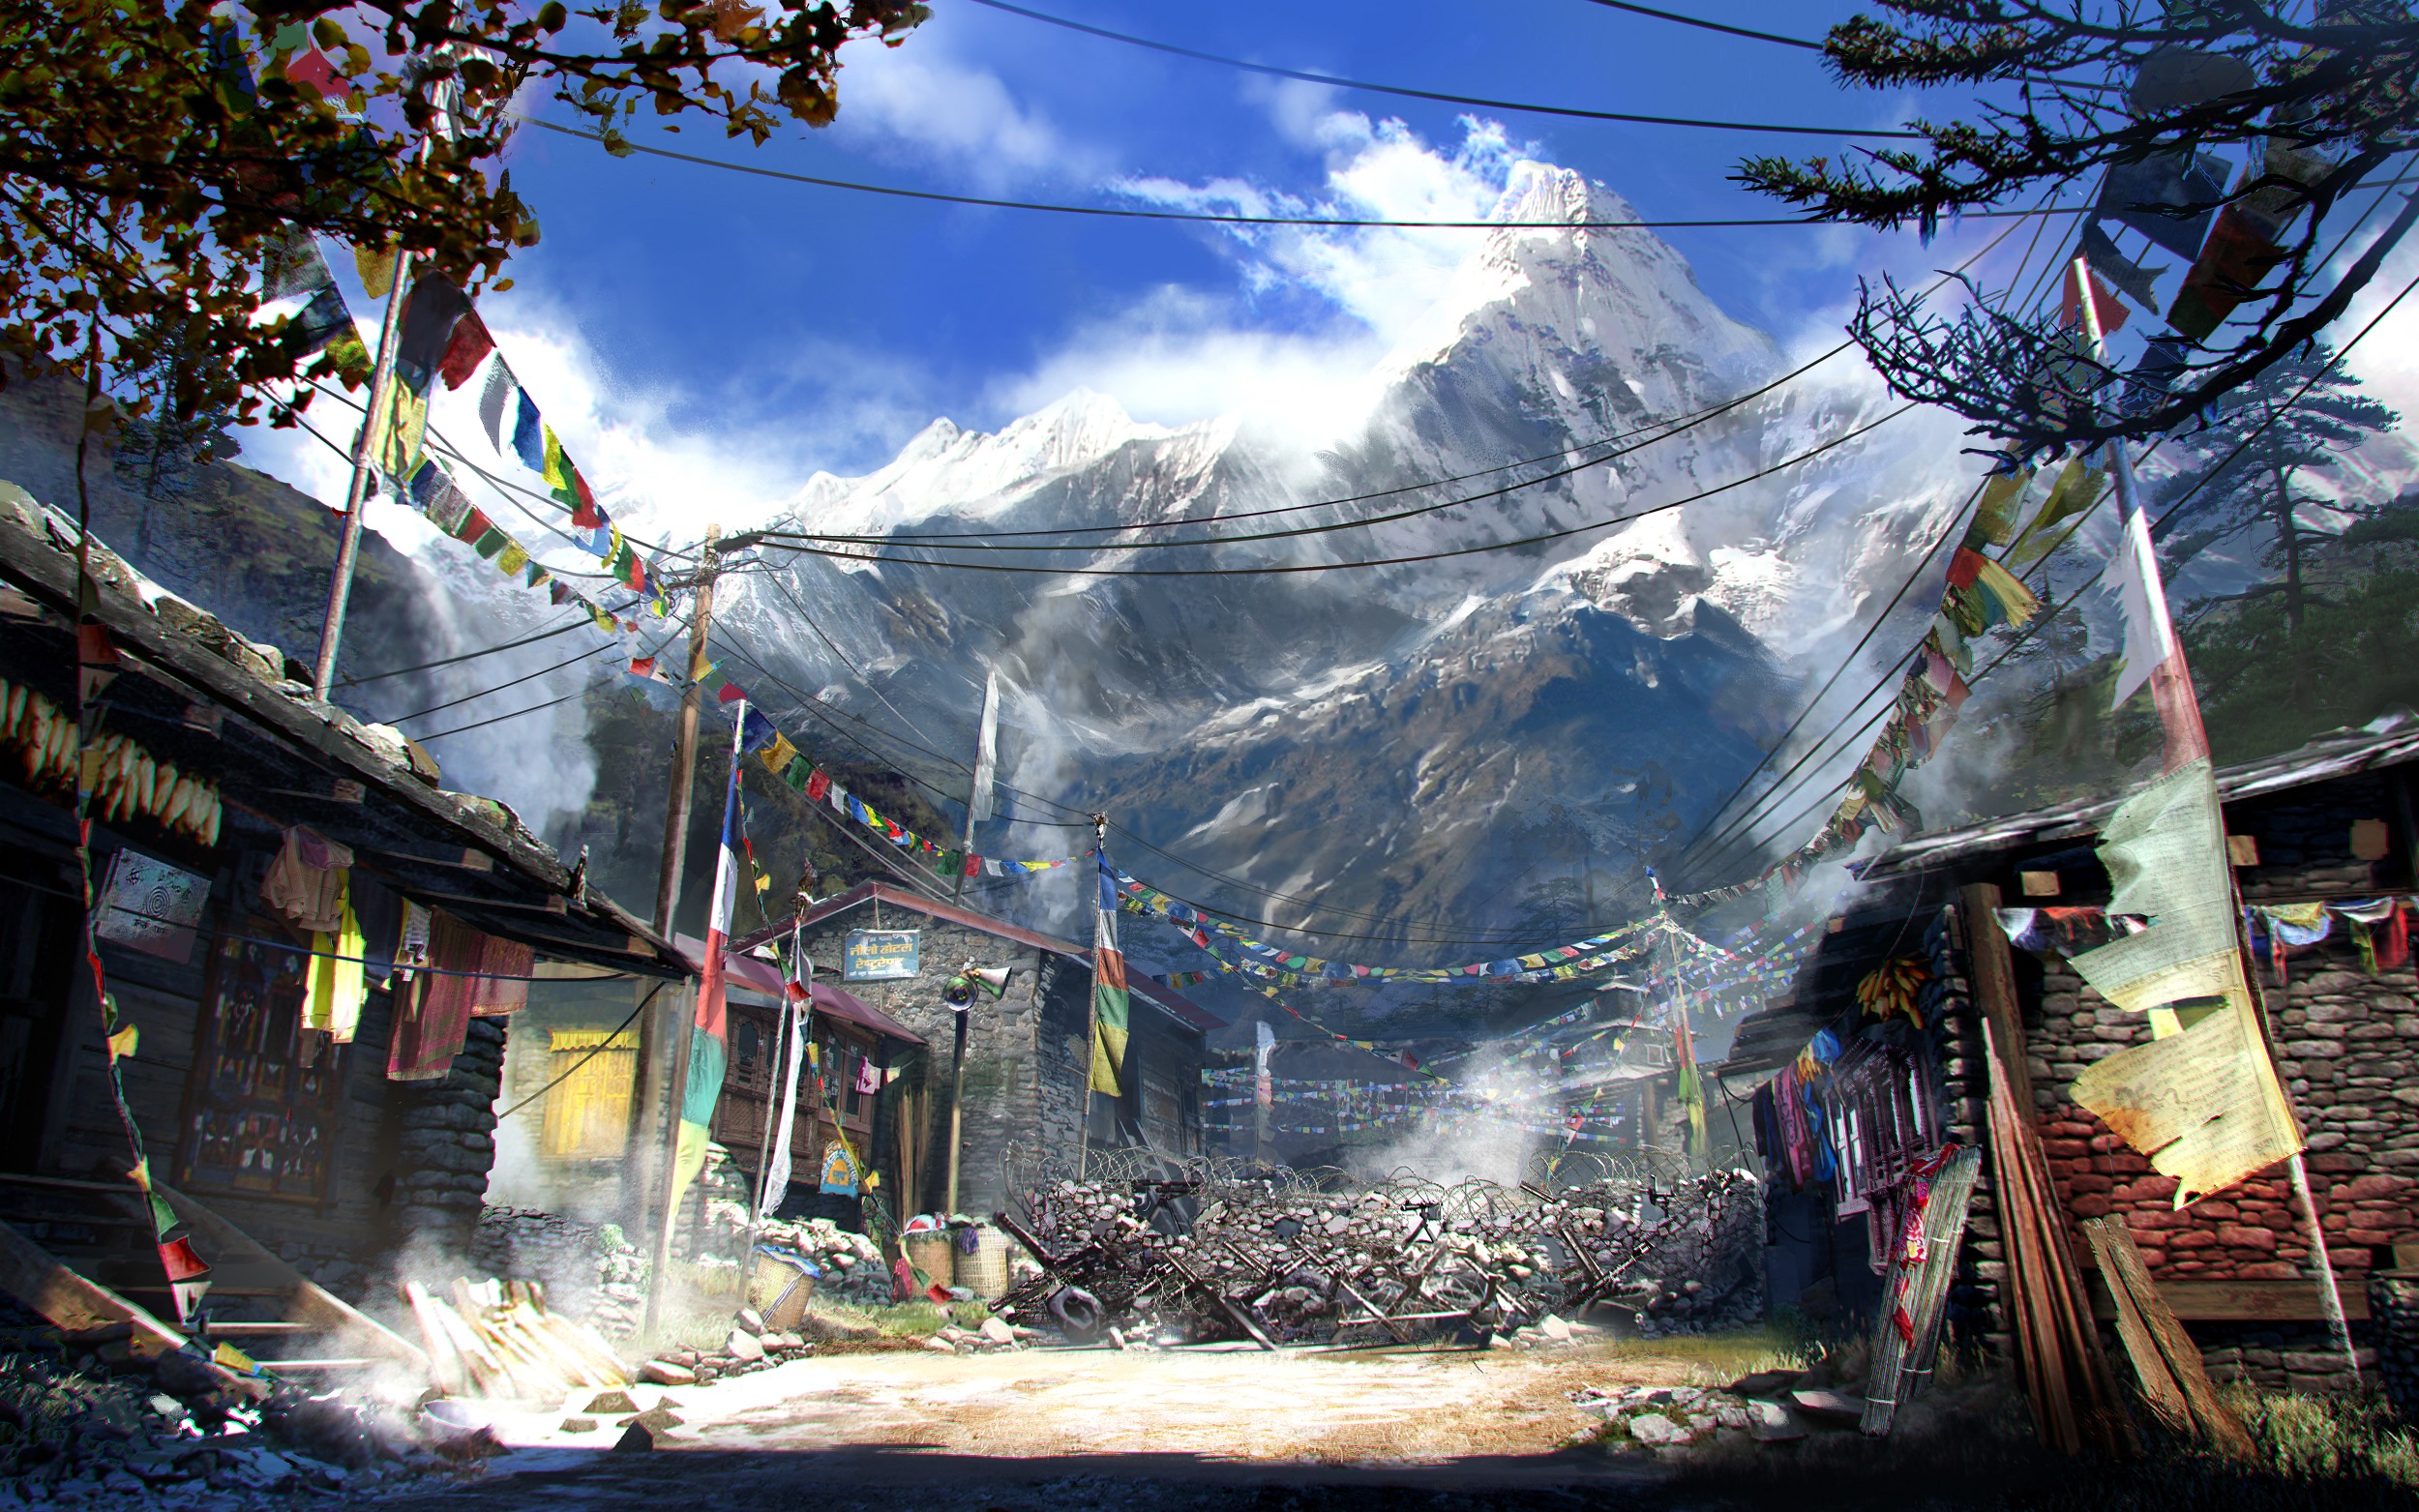 4k far cry 4 download free